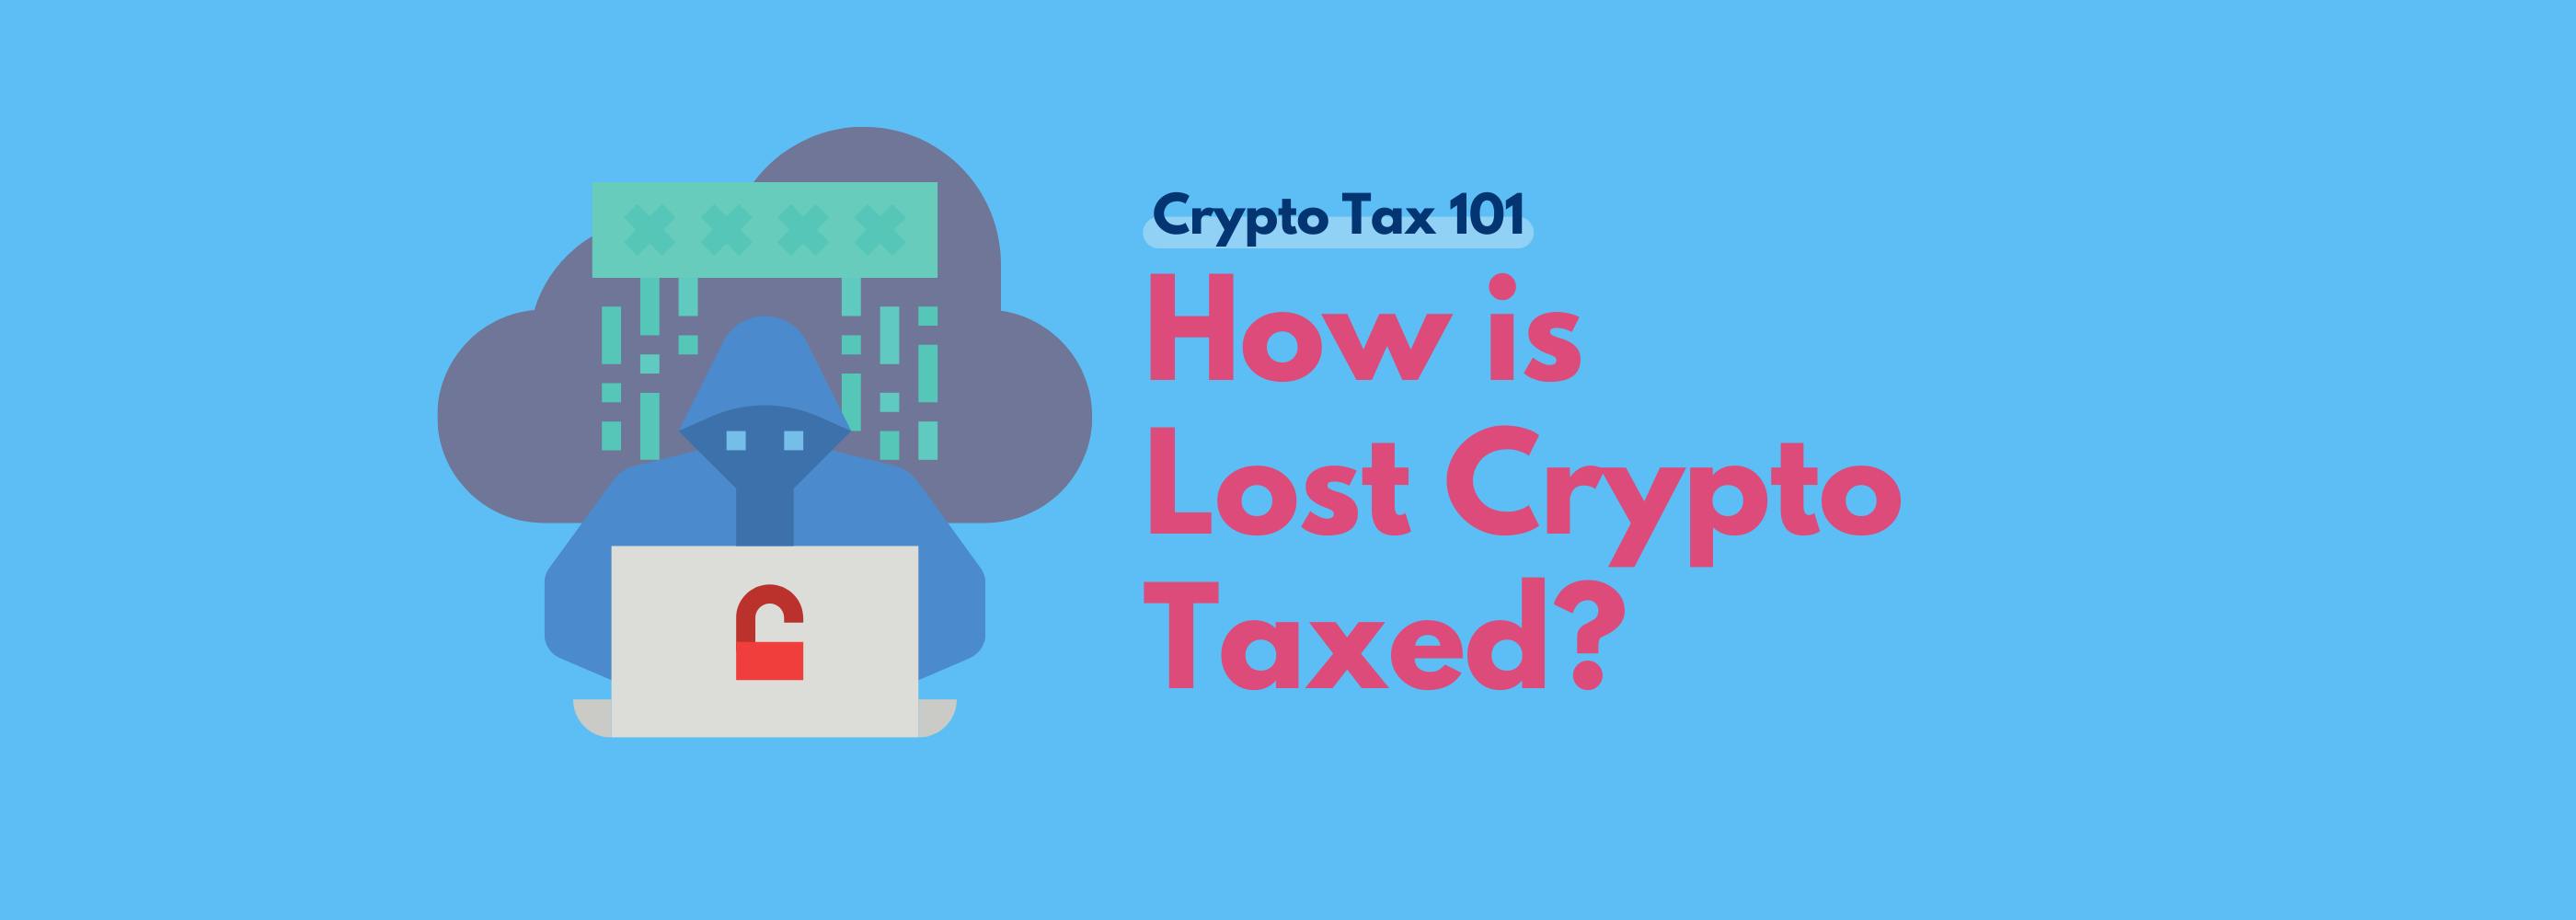 do you pay taxes on crypto if you lost money